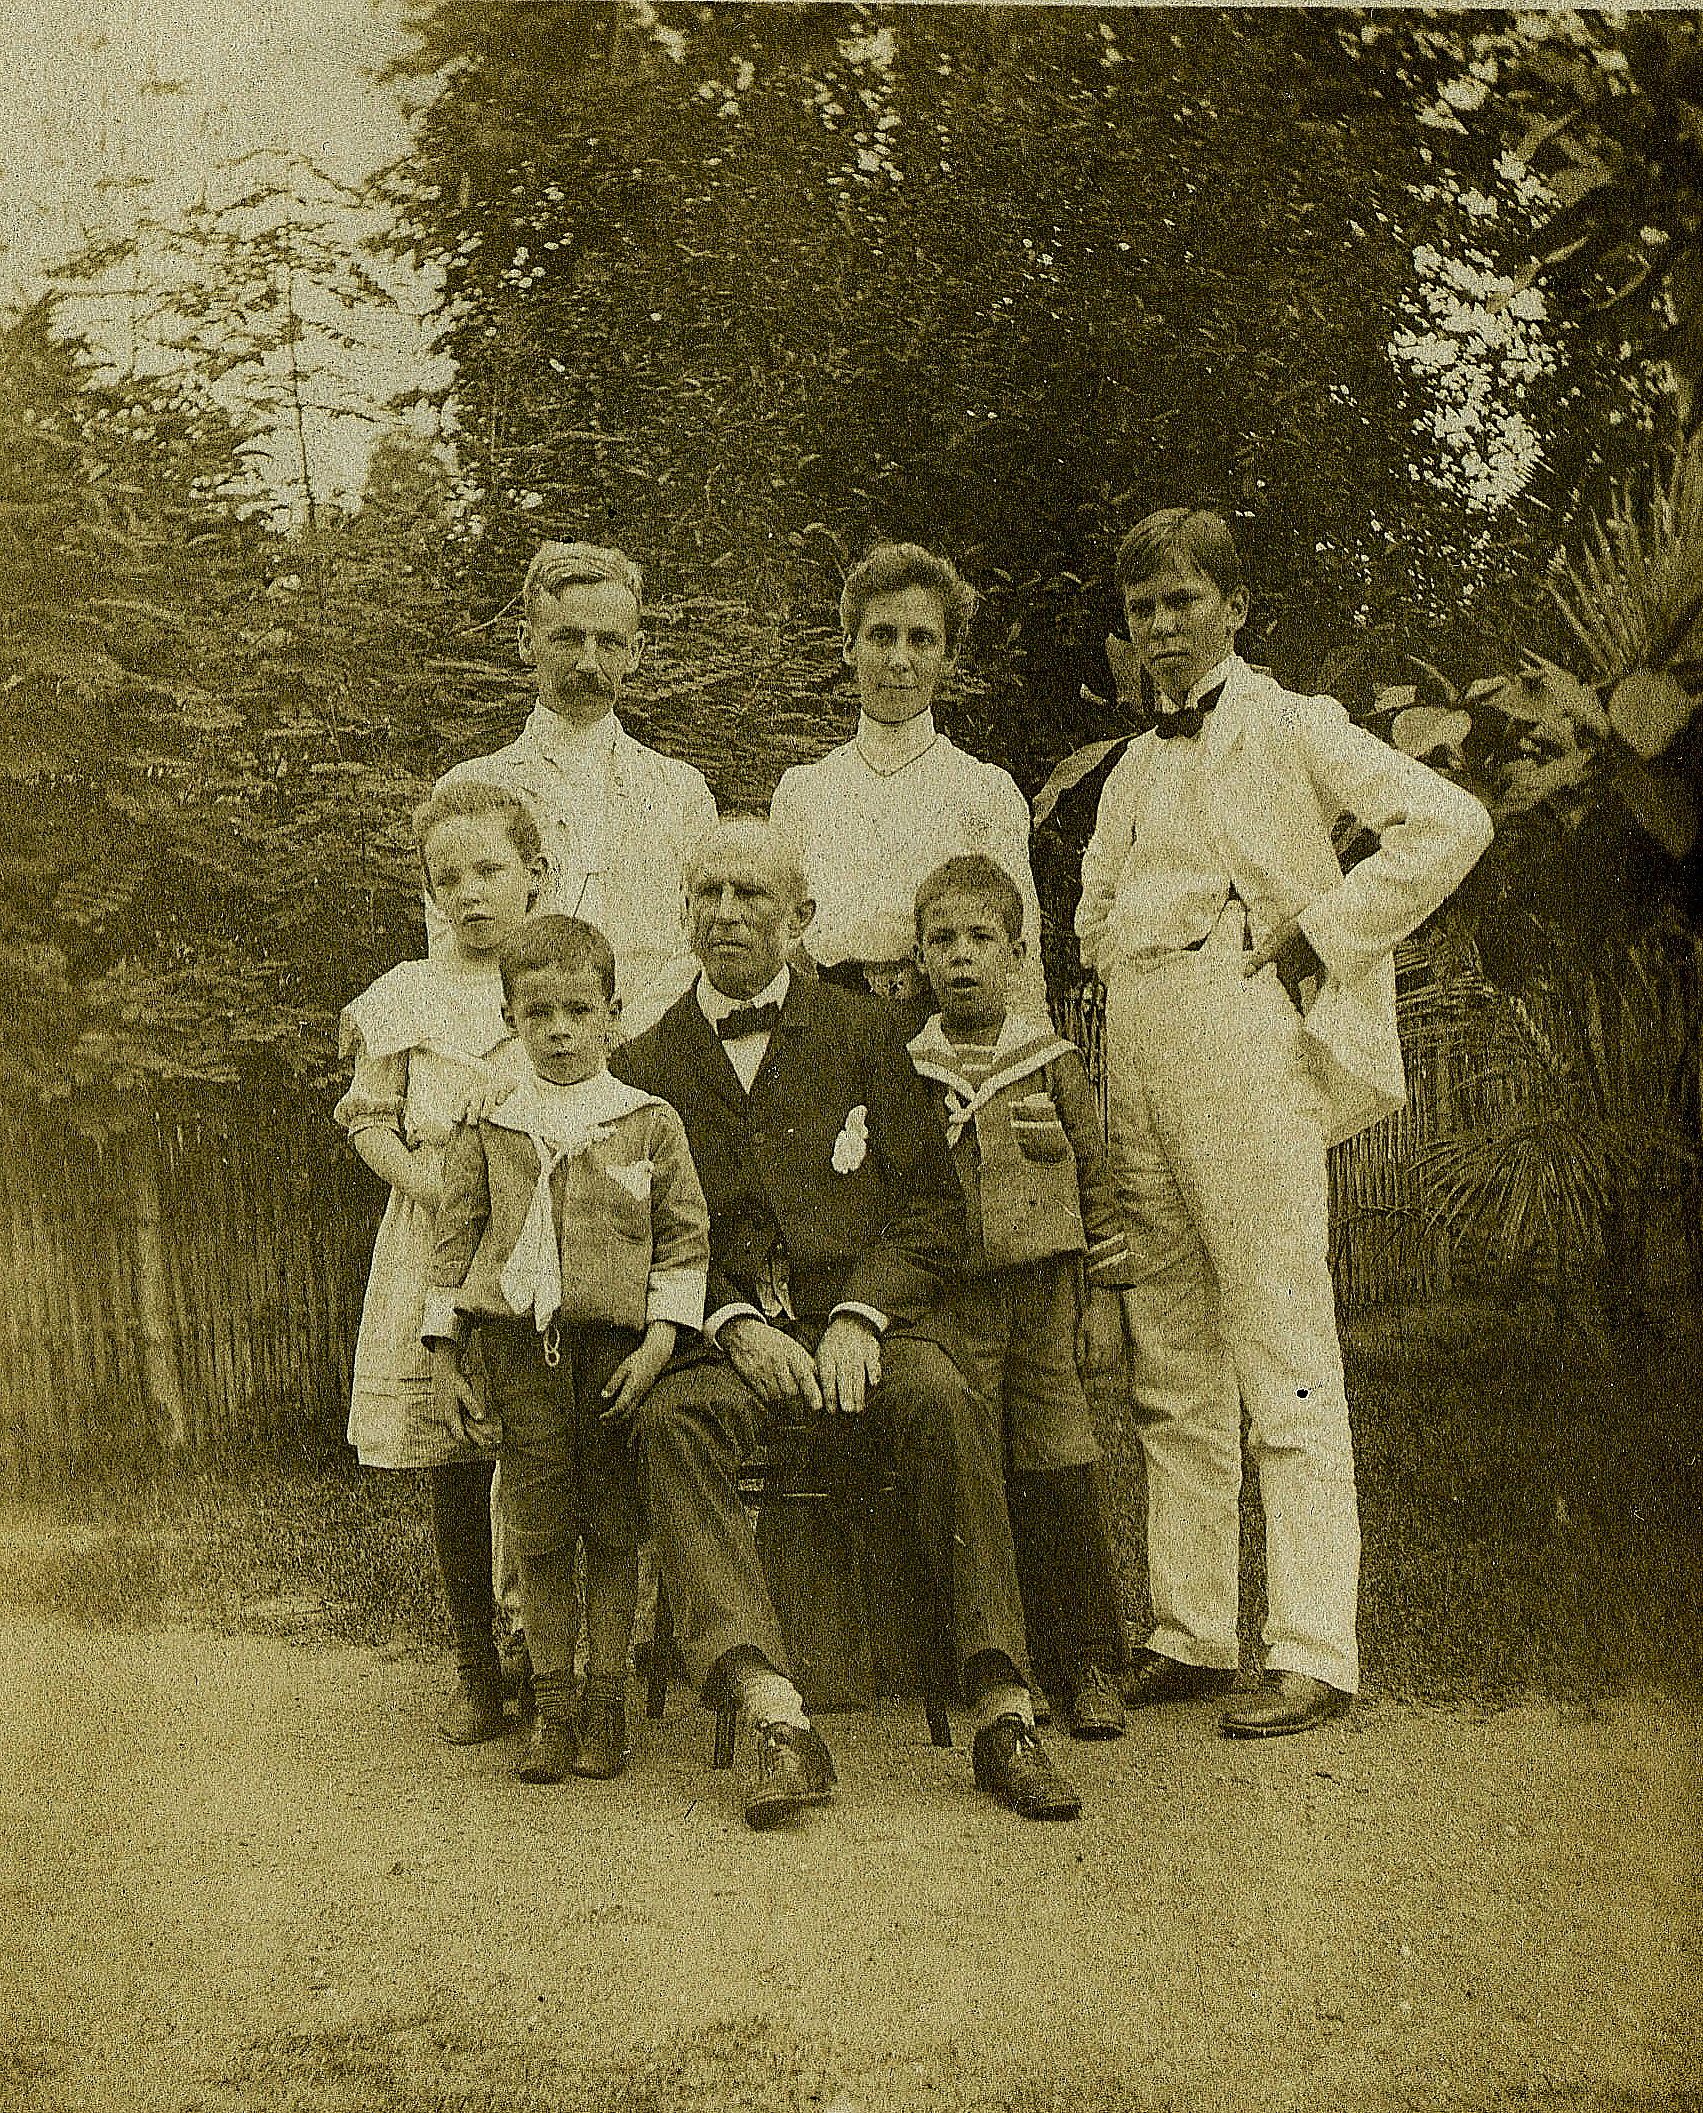 RODGERS FAMILY 1903